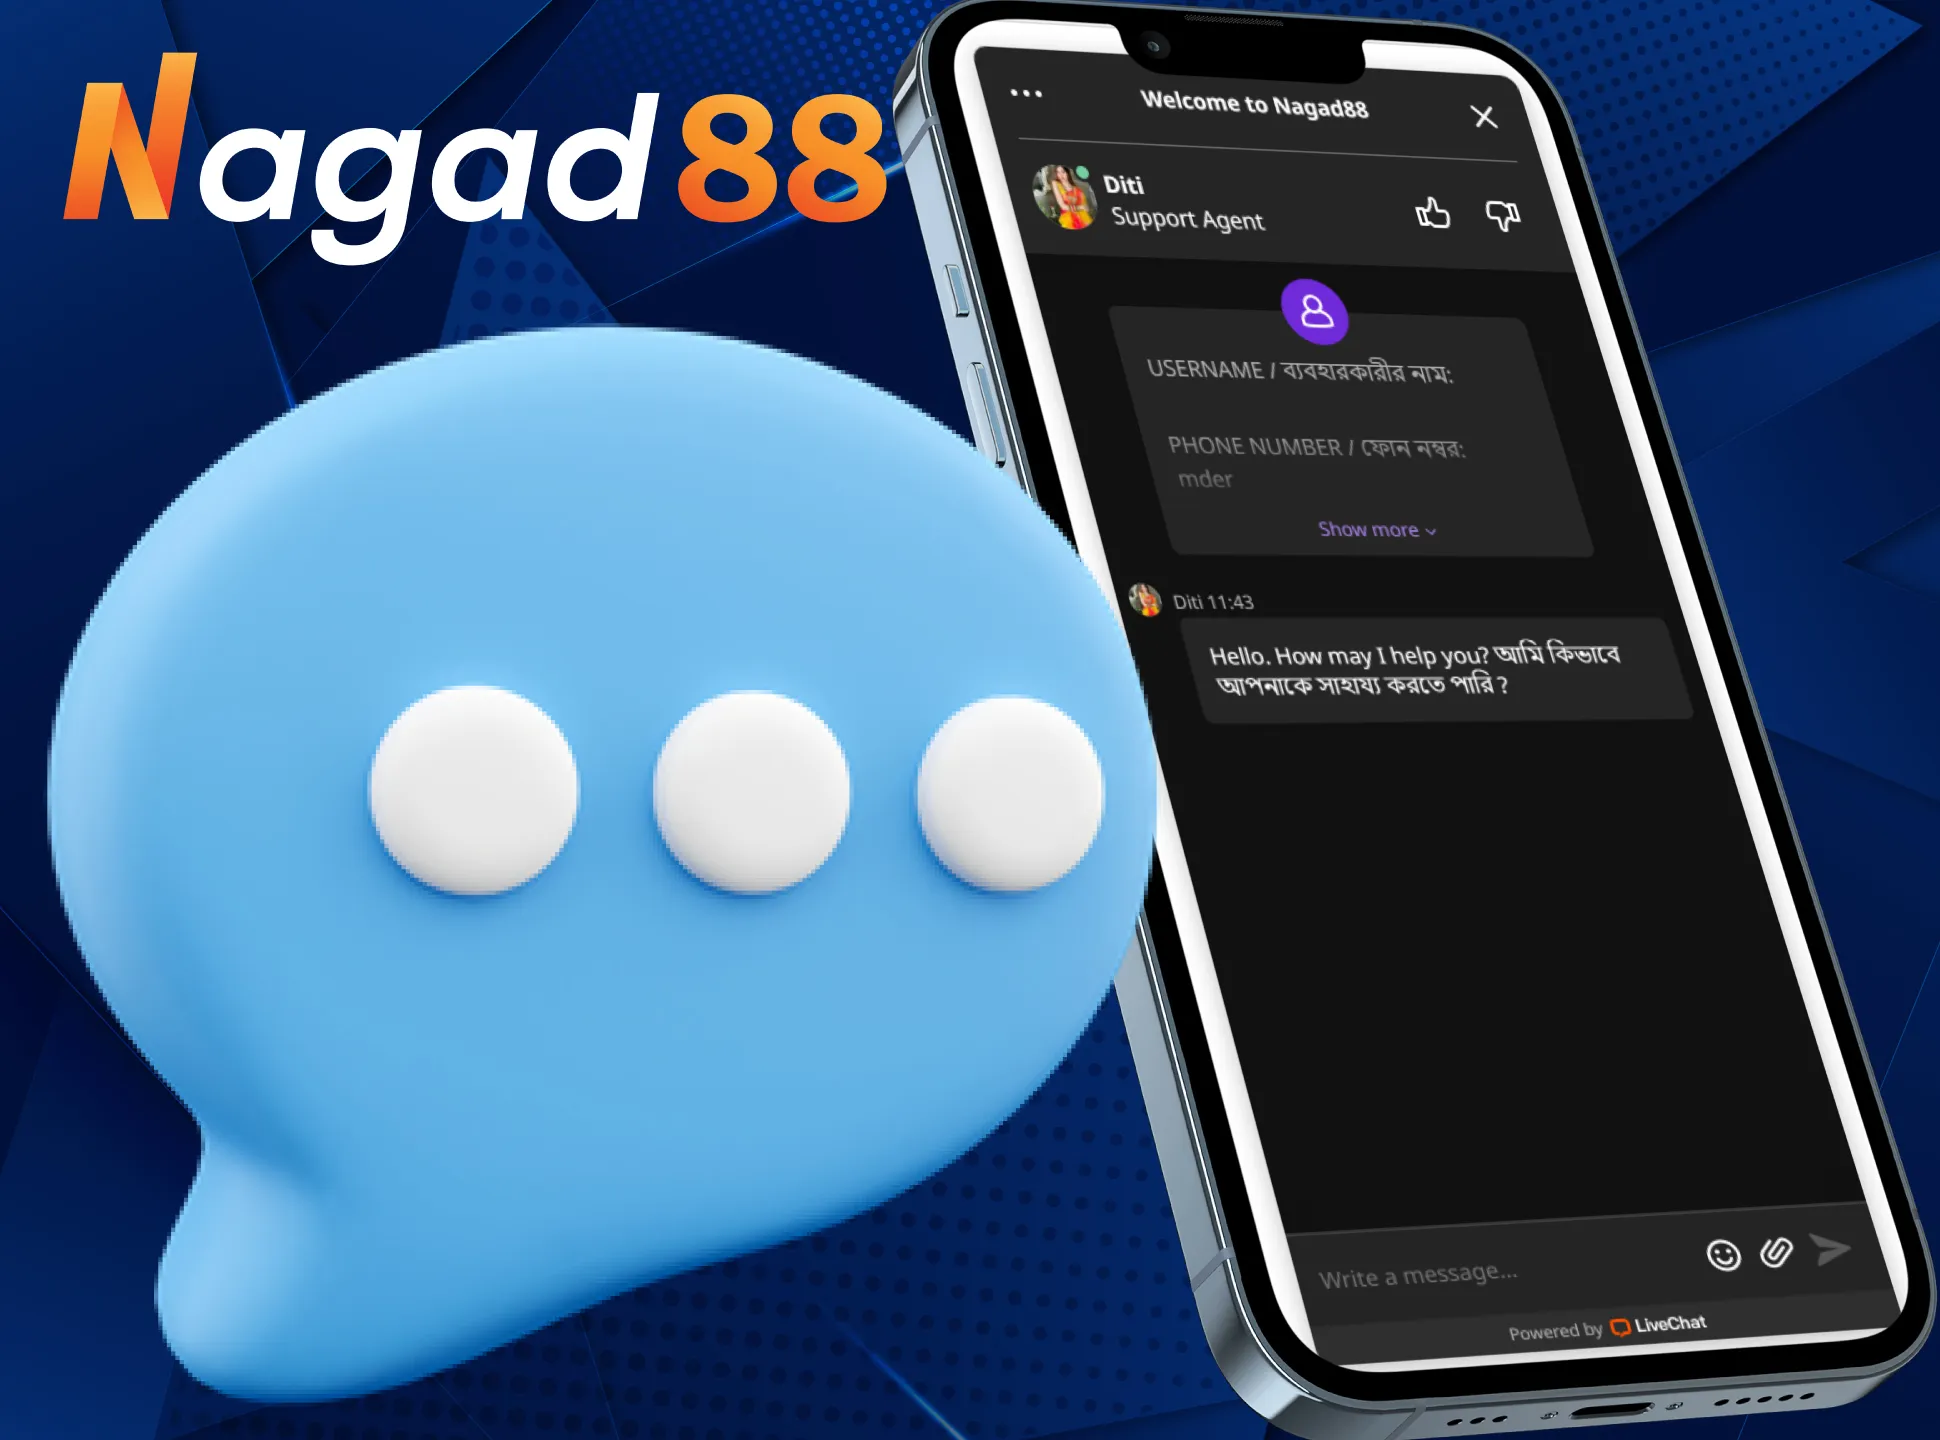 Count on Nagad88's 24/7 support at online chat.